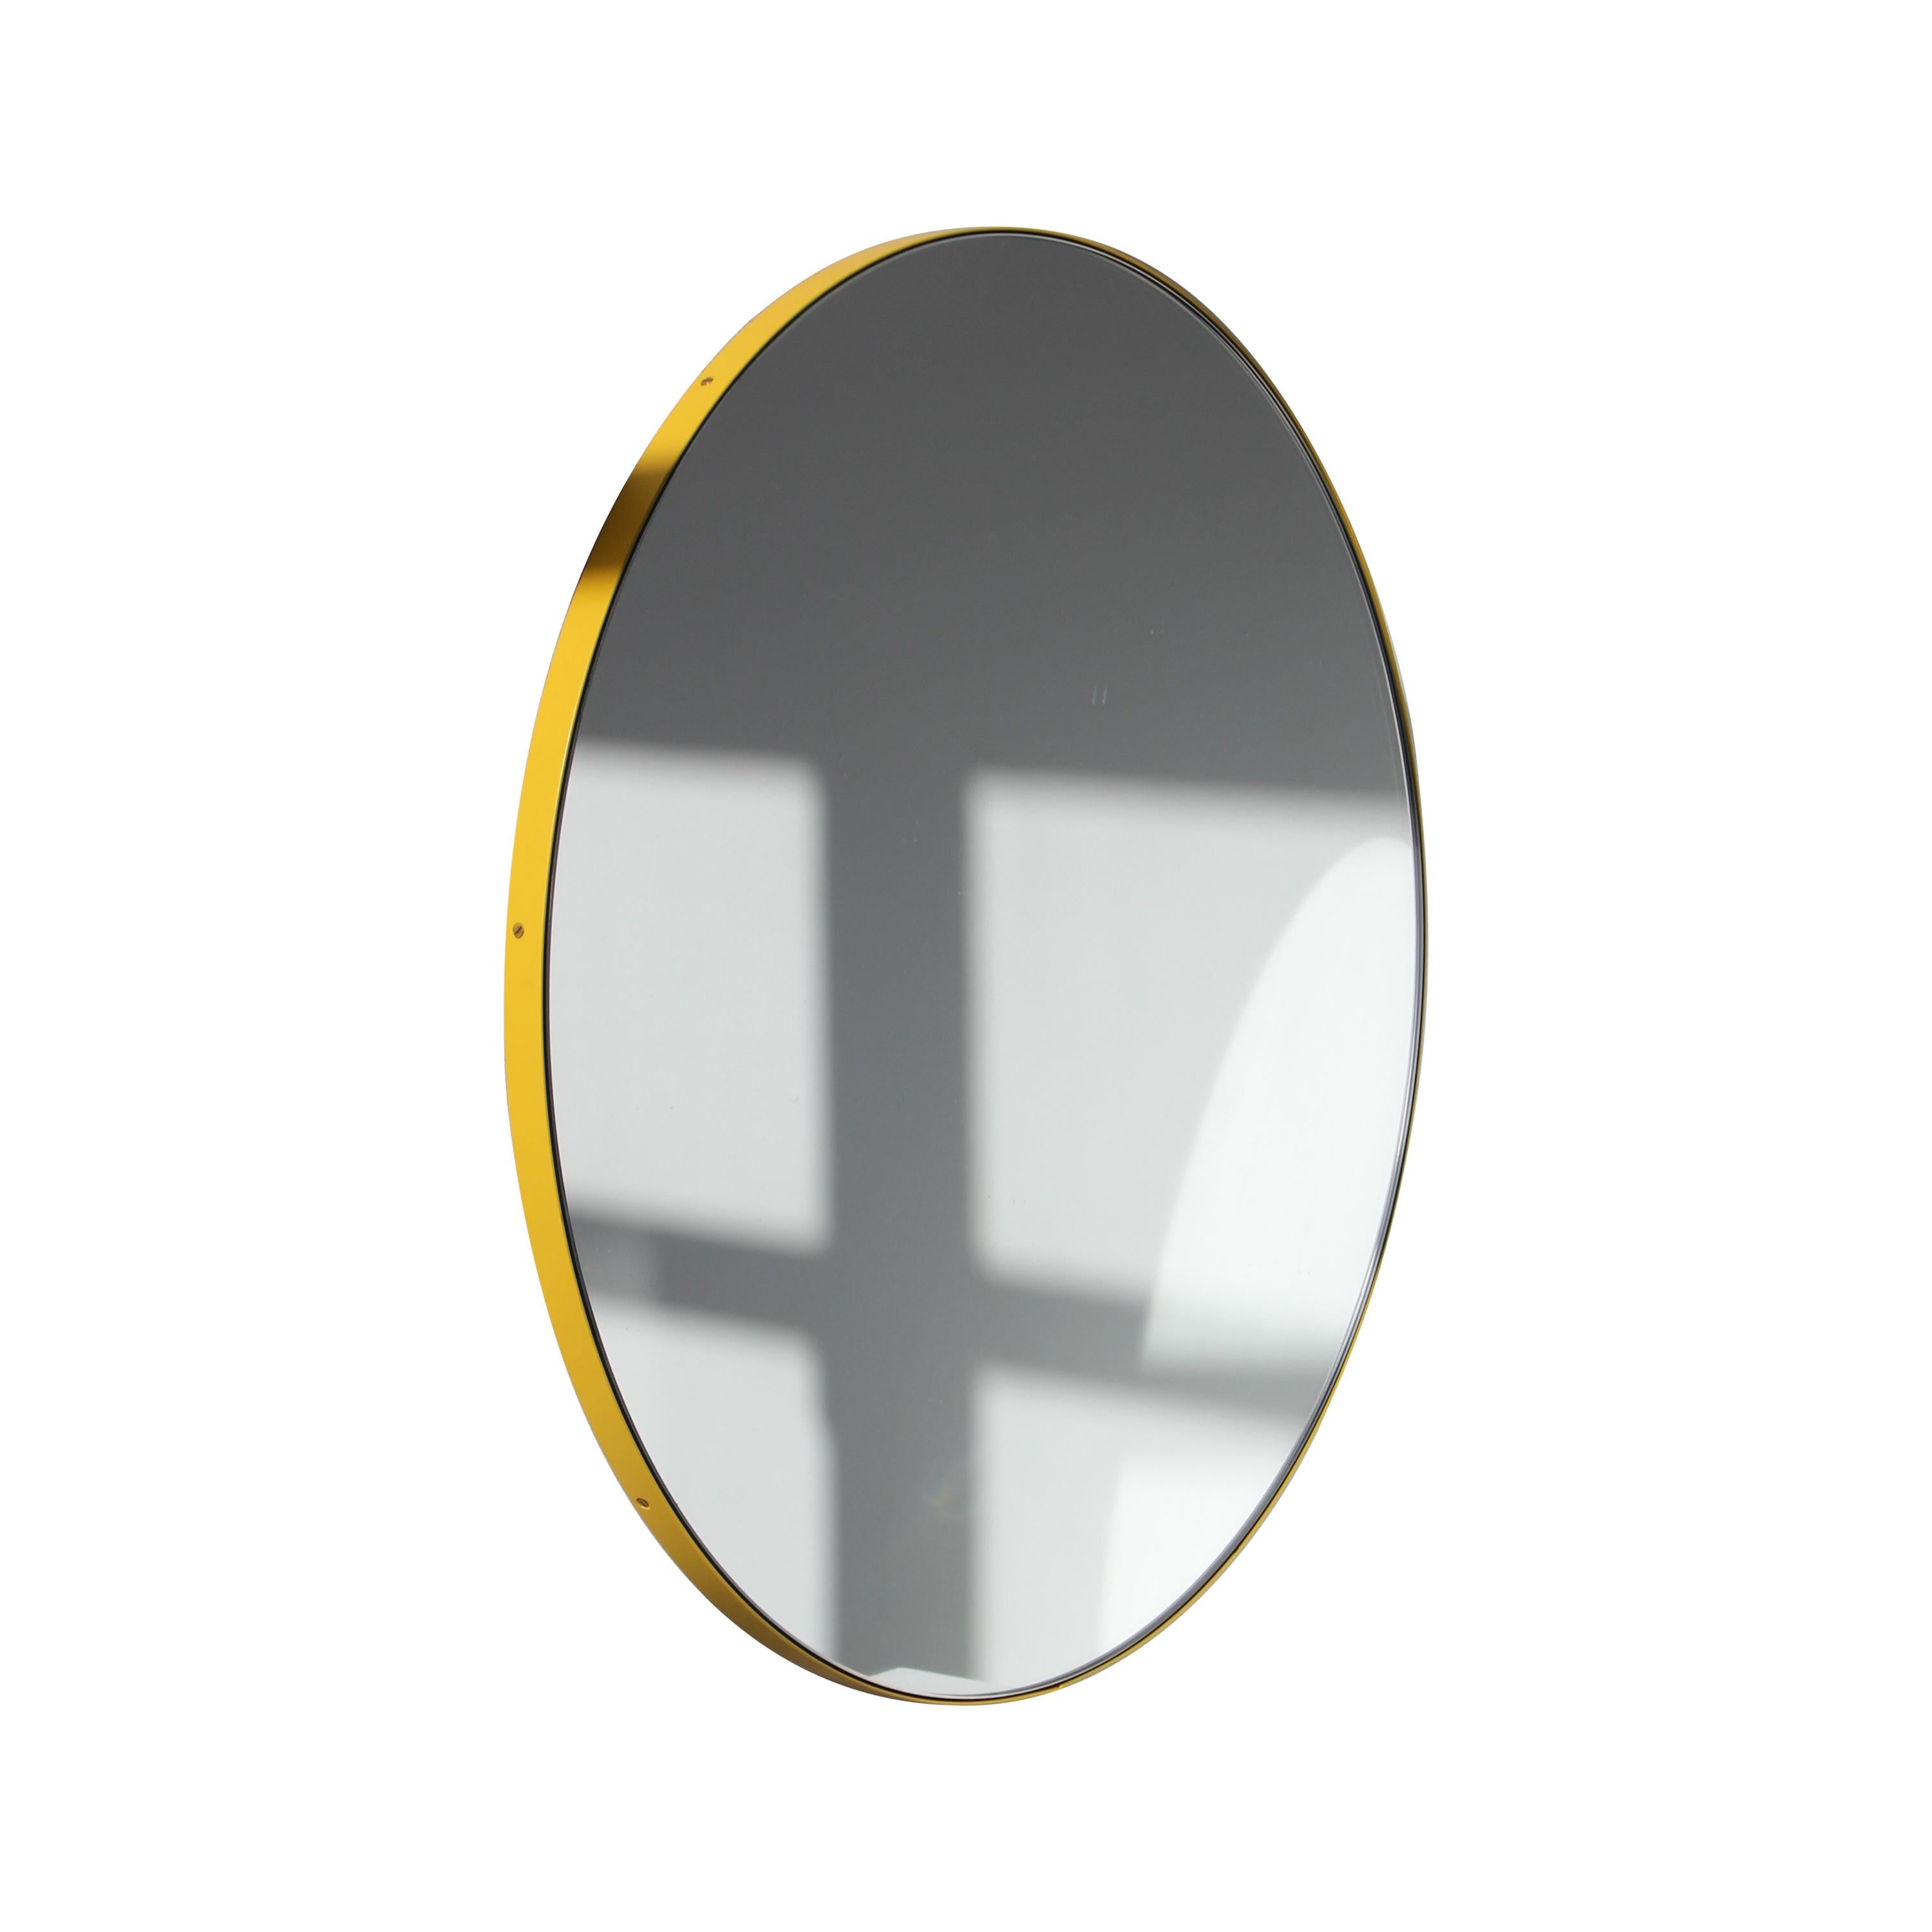 Orbis Round Modern Handcrafted Mirror with Yellow Frame, Medium For Sale